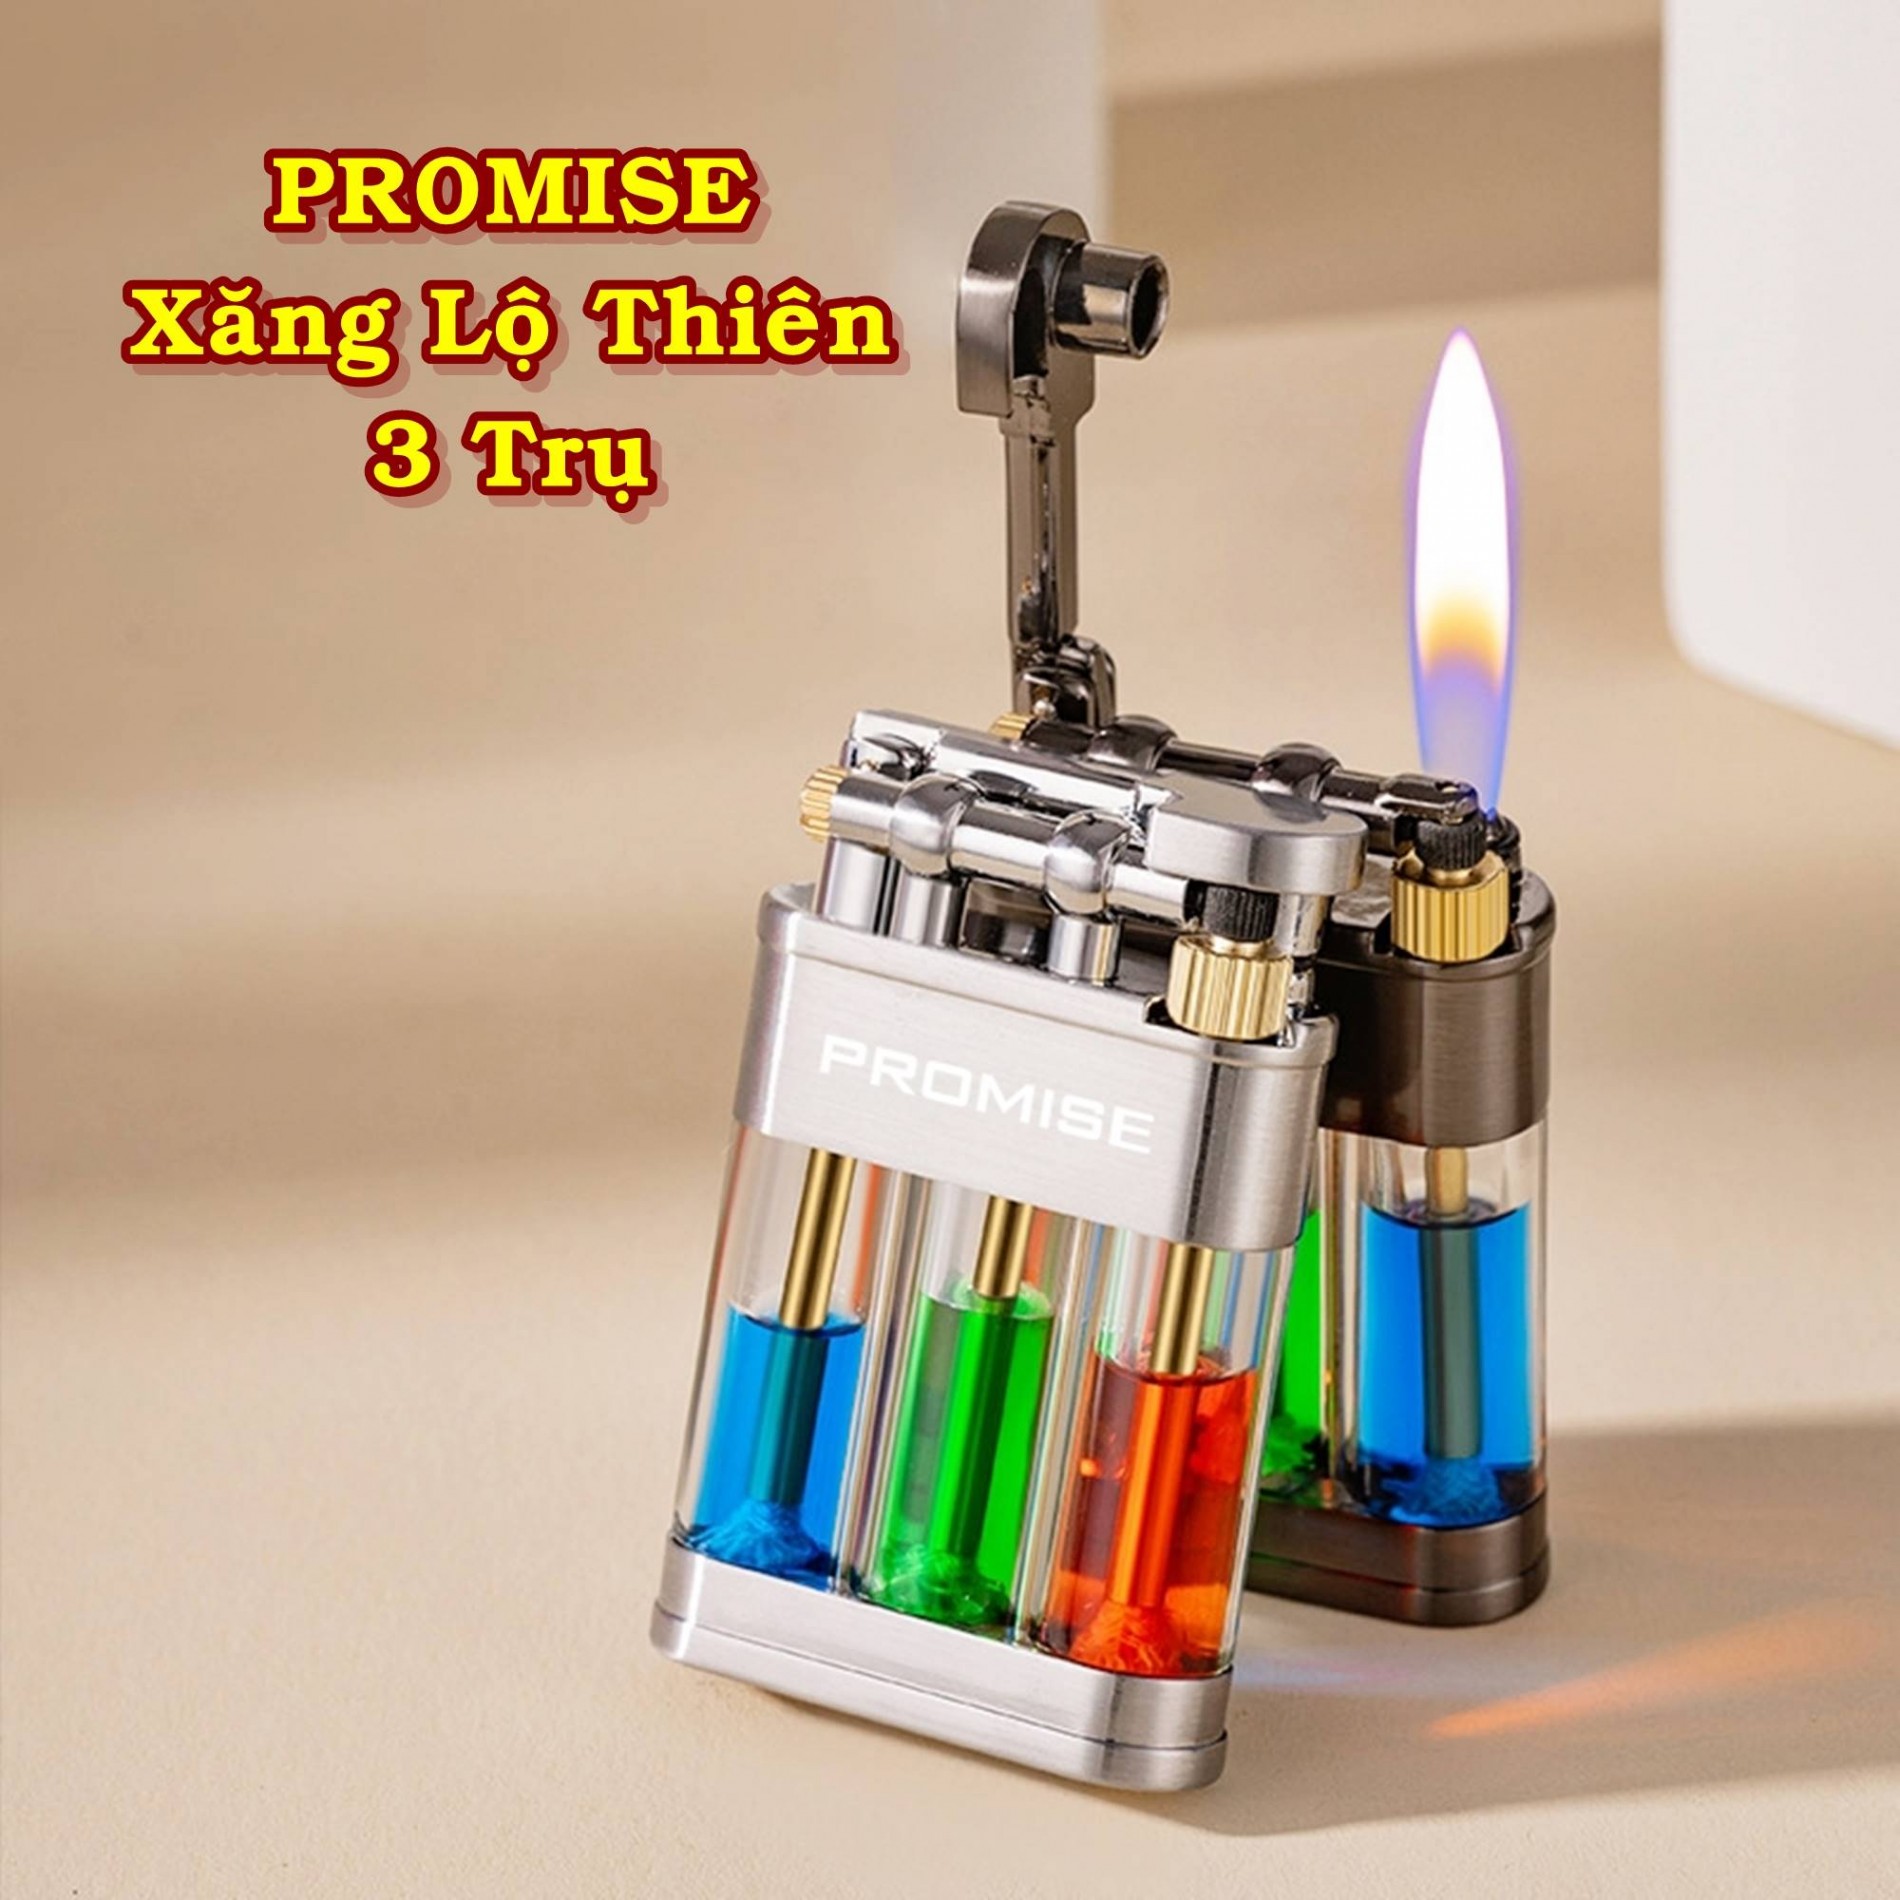 promise_xang_lo_thien_8